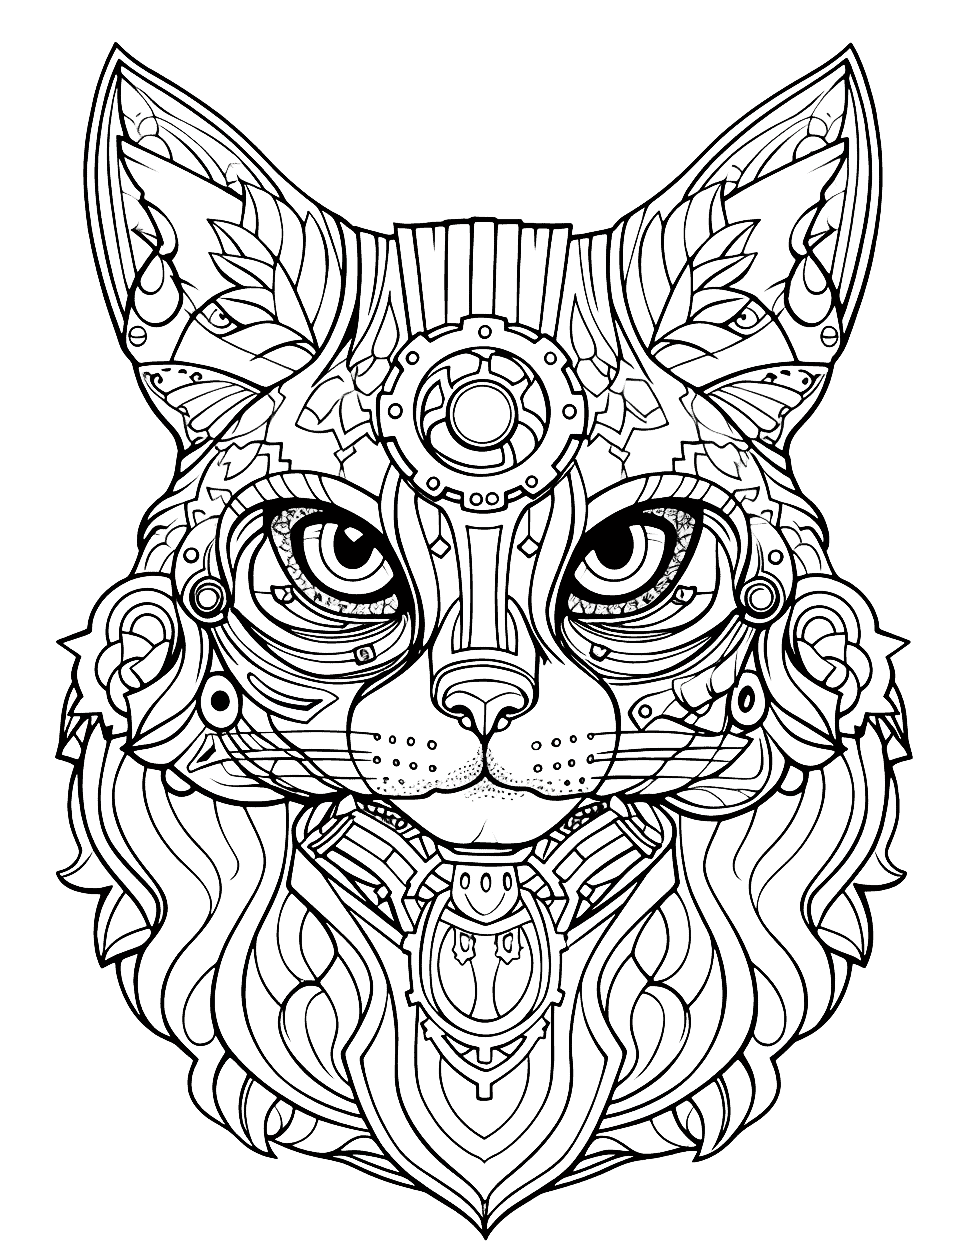 Steampunk Cat Adult Coloring Page - Detailed and intricate depictions of a cat with a steampunk twist.